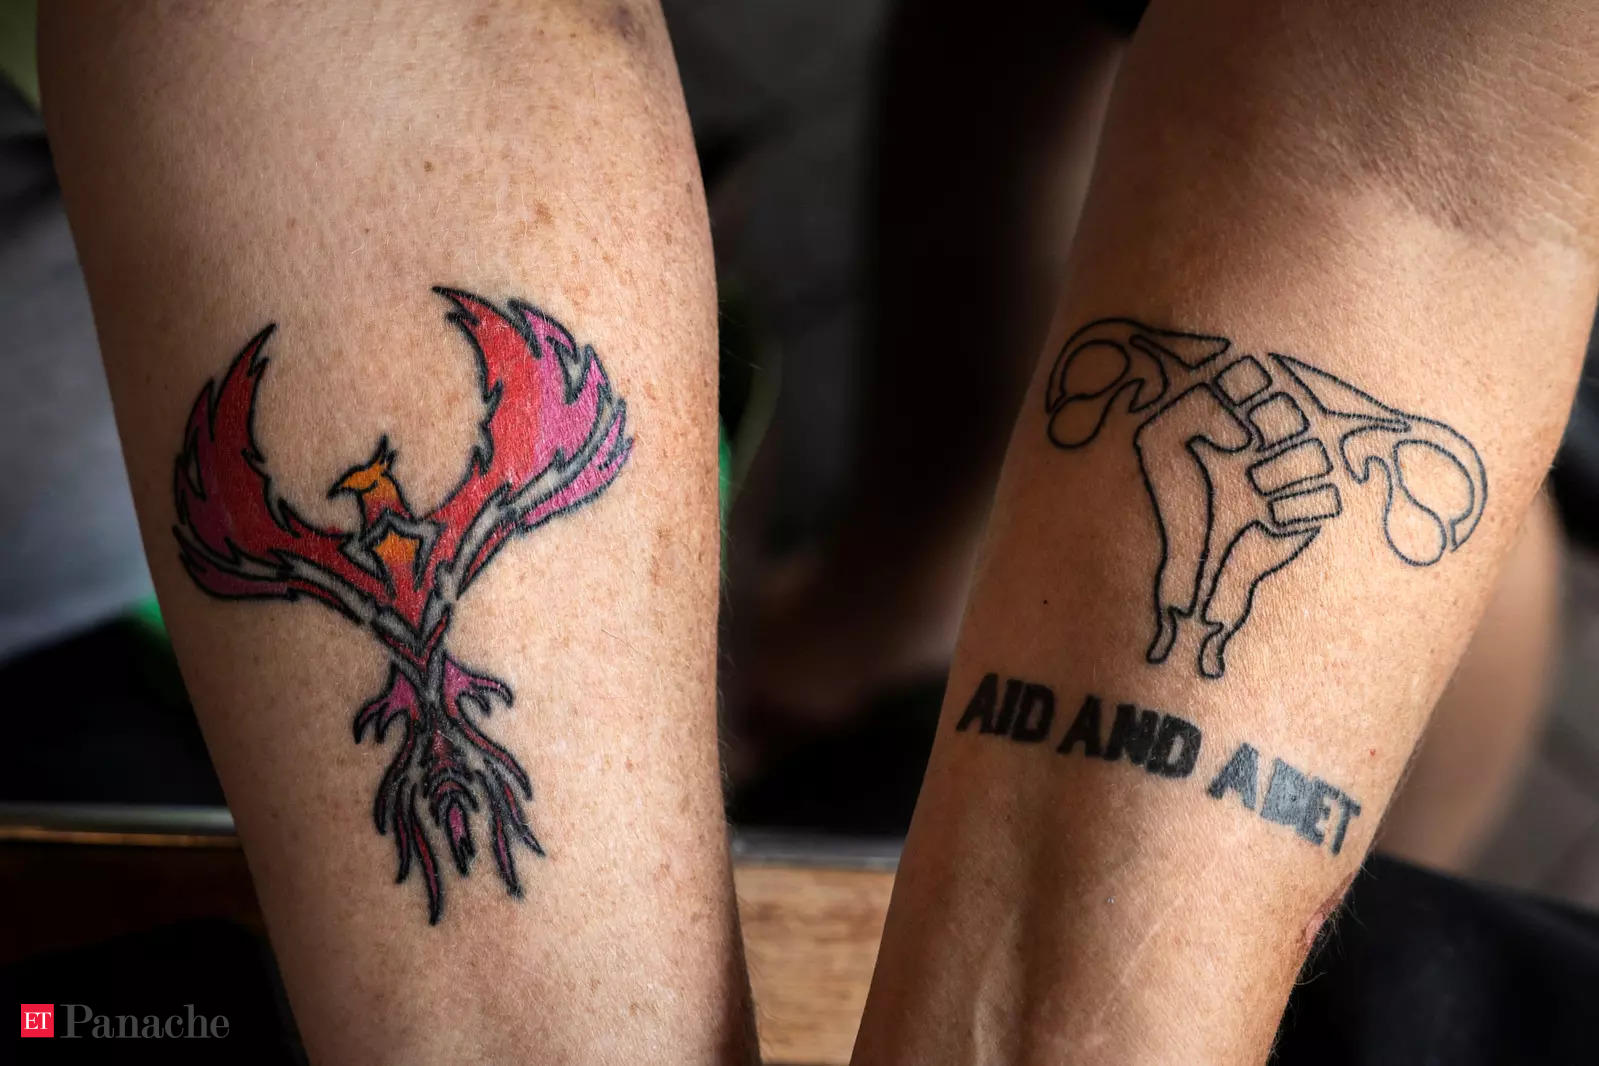 The Most and Least Painful Places on Your Body to Tattoo  The Healthy